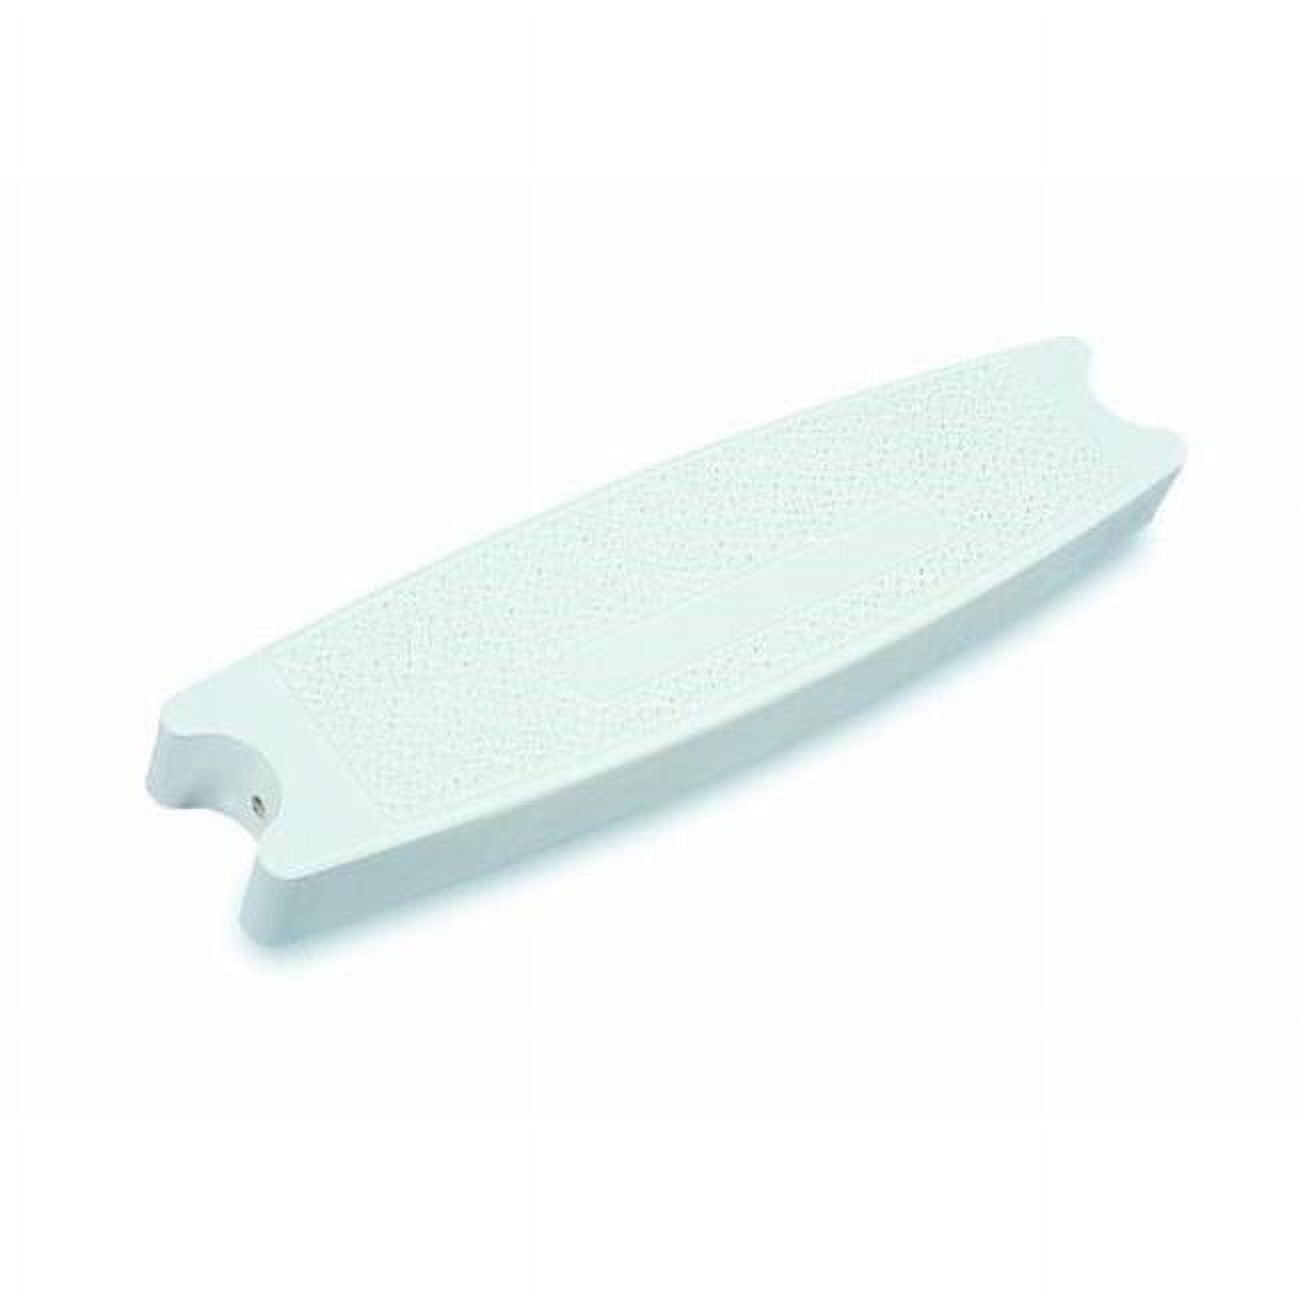 OSCS-HC Climate Shield Pool Heater Cover, White